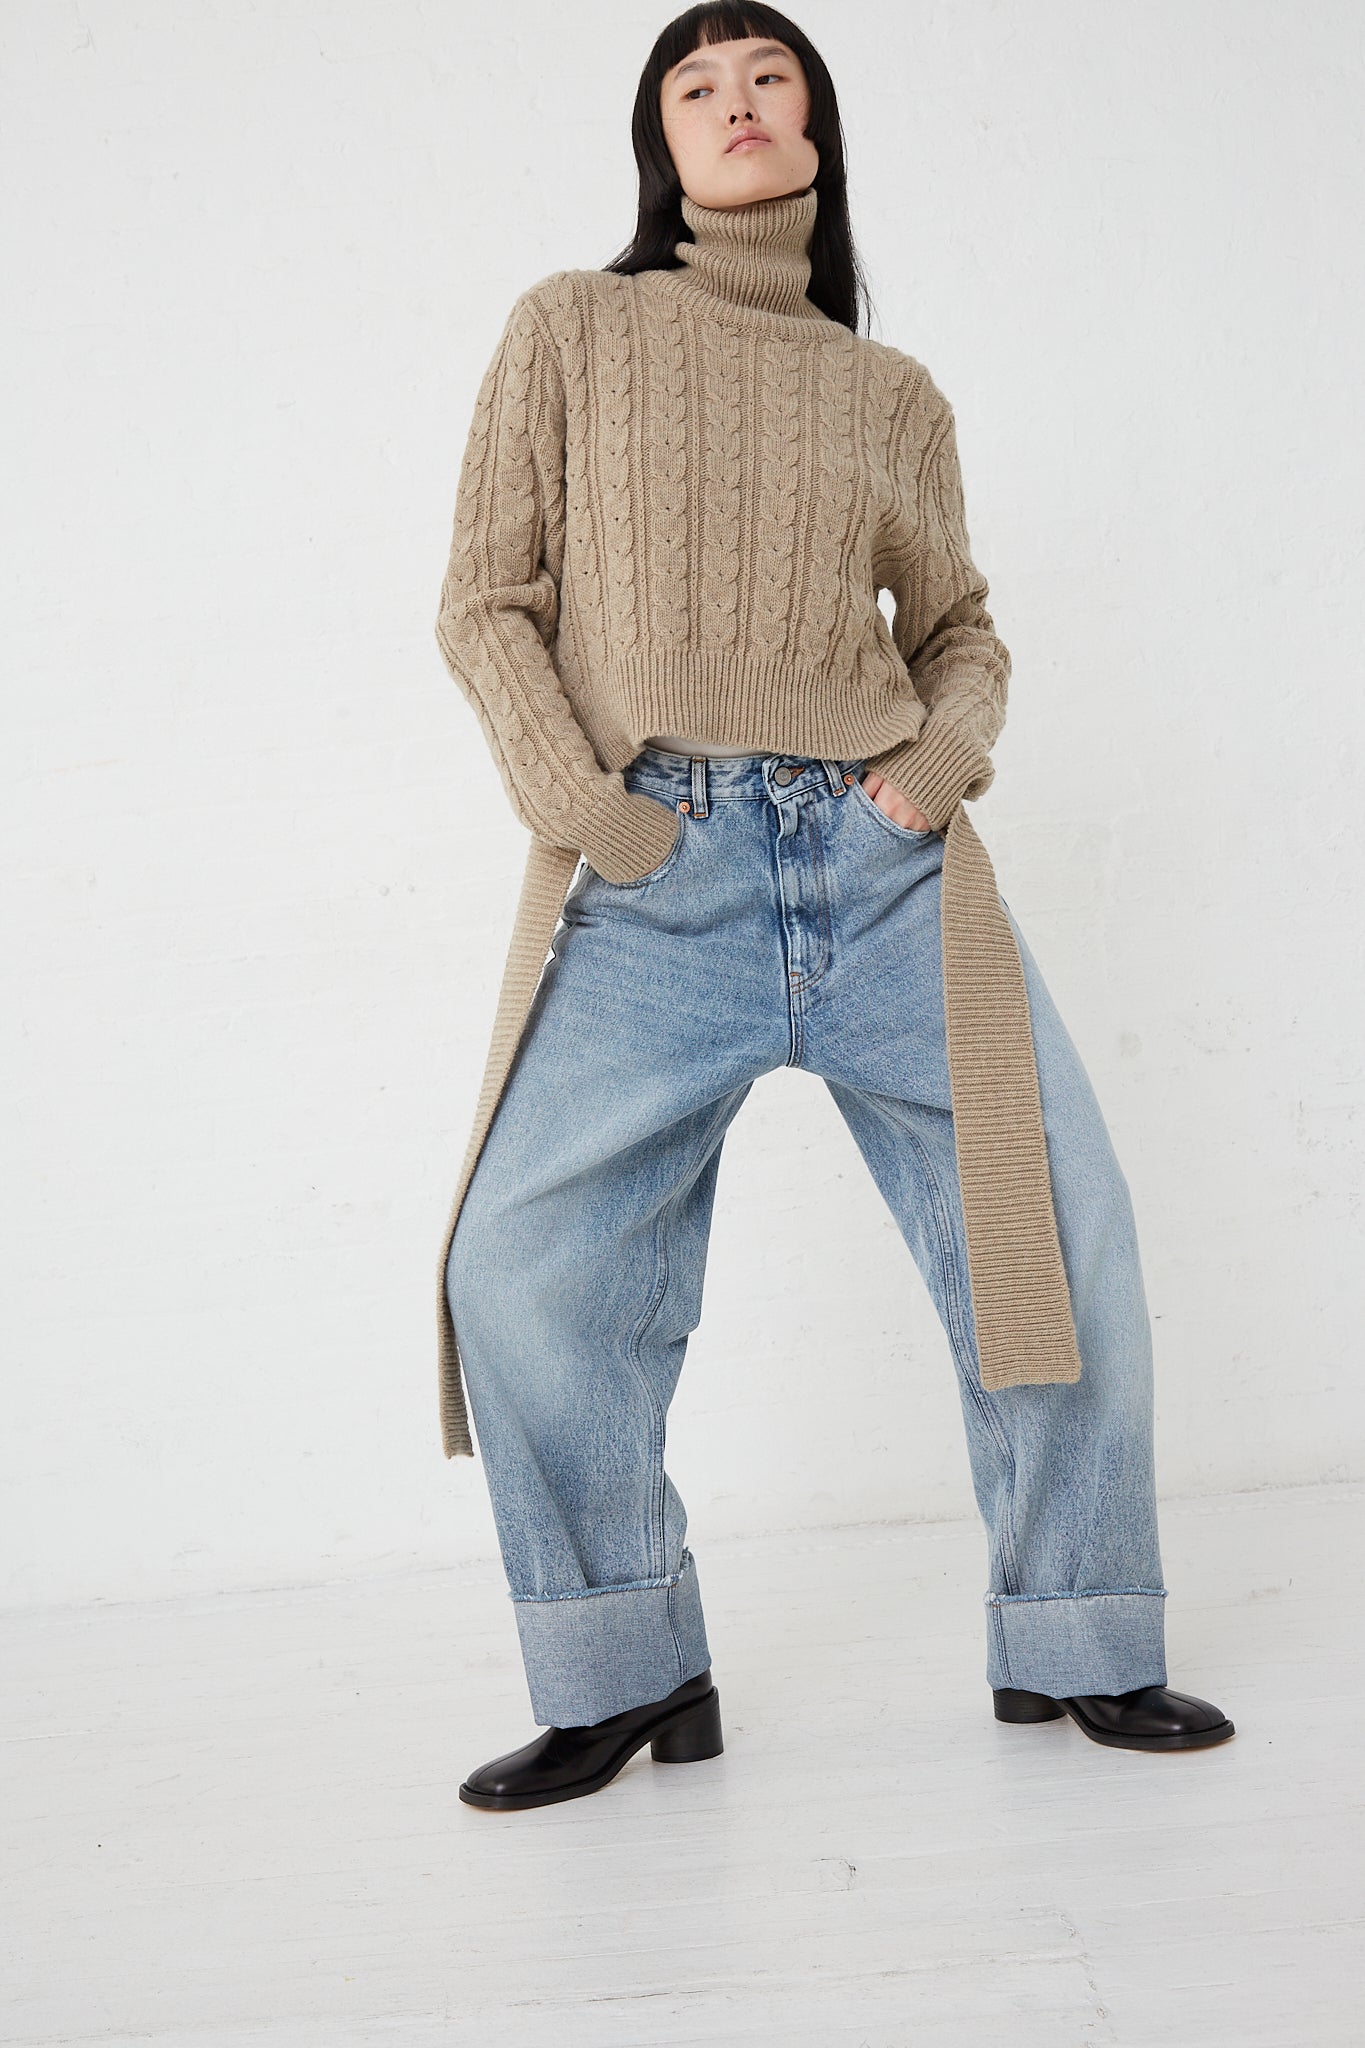 A woman wearing a MM6 5 Pocket Pant in Light Indigo and a turtleneck sweater.